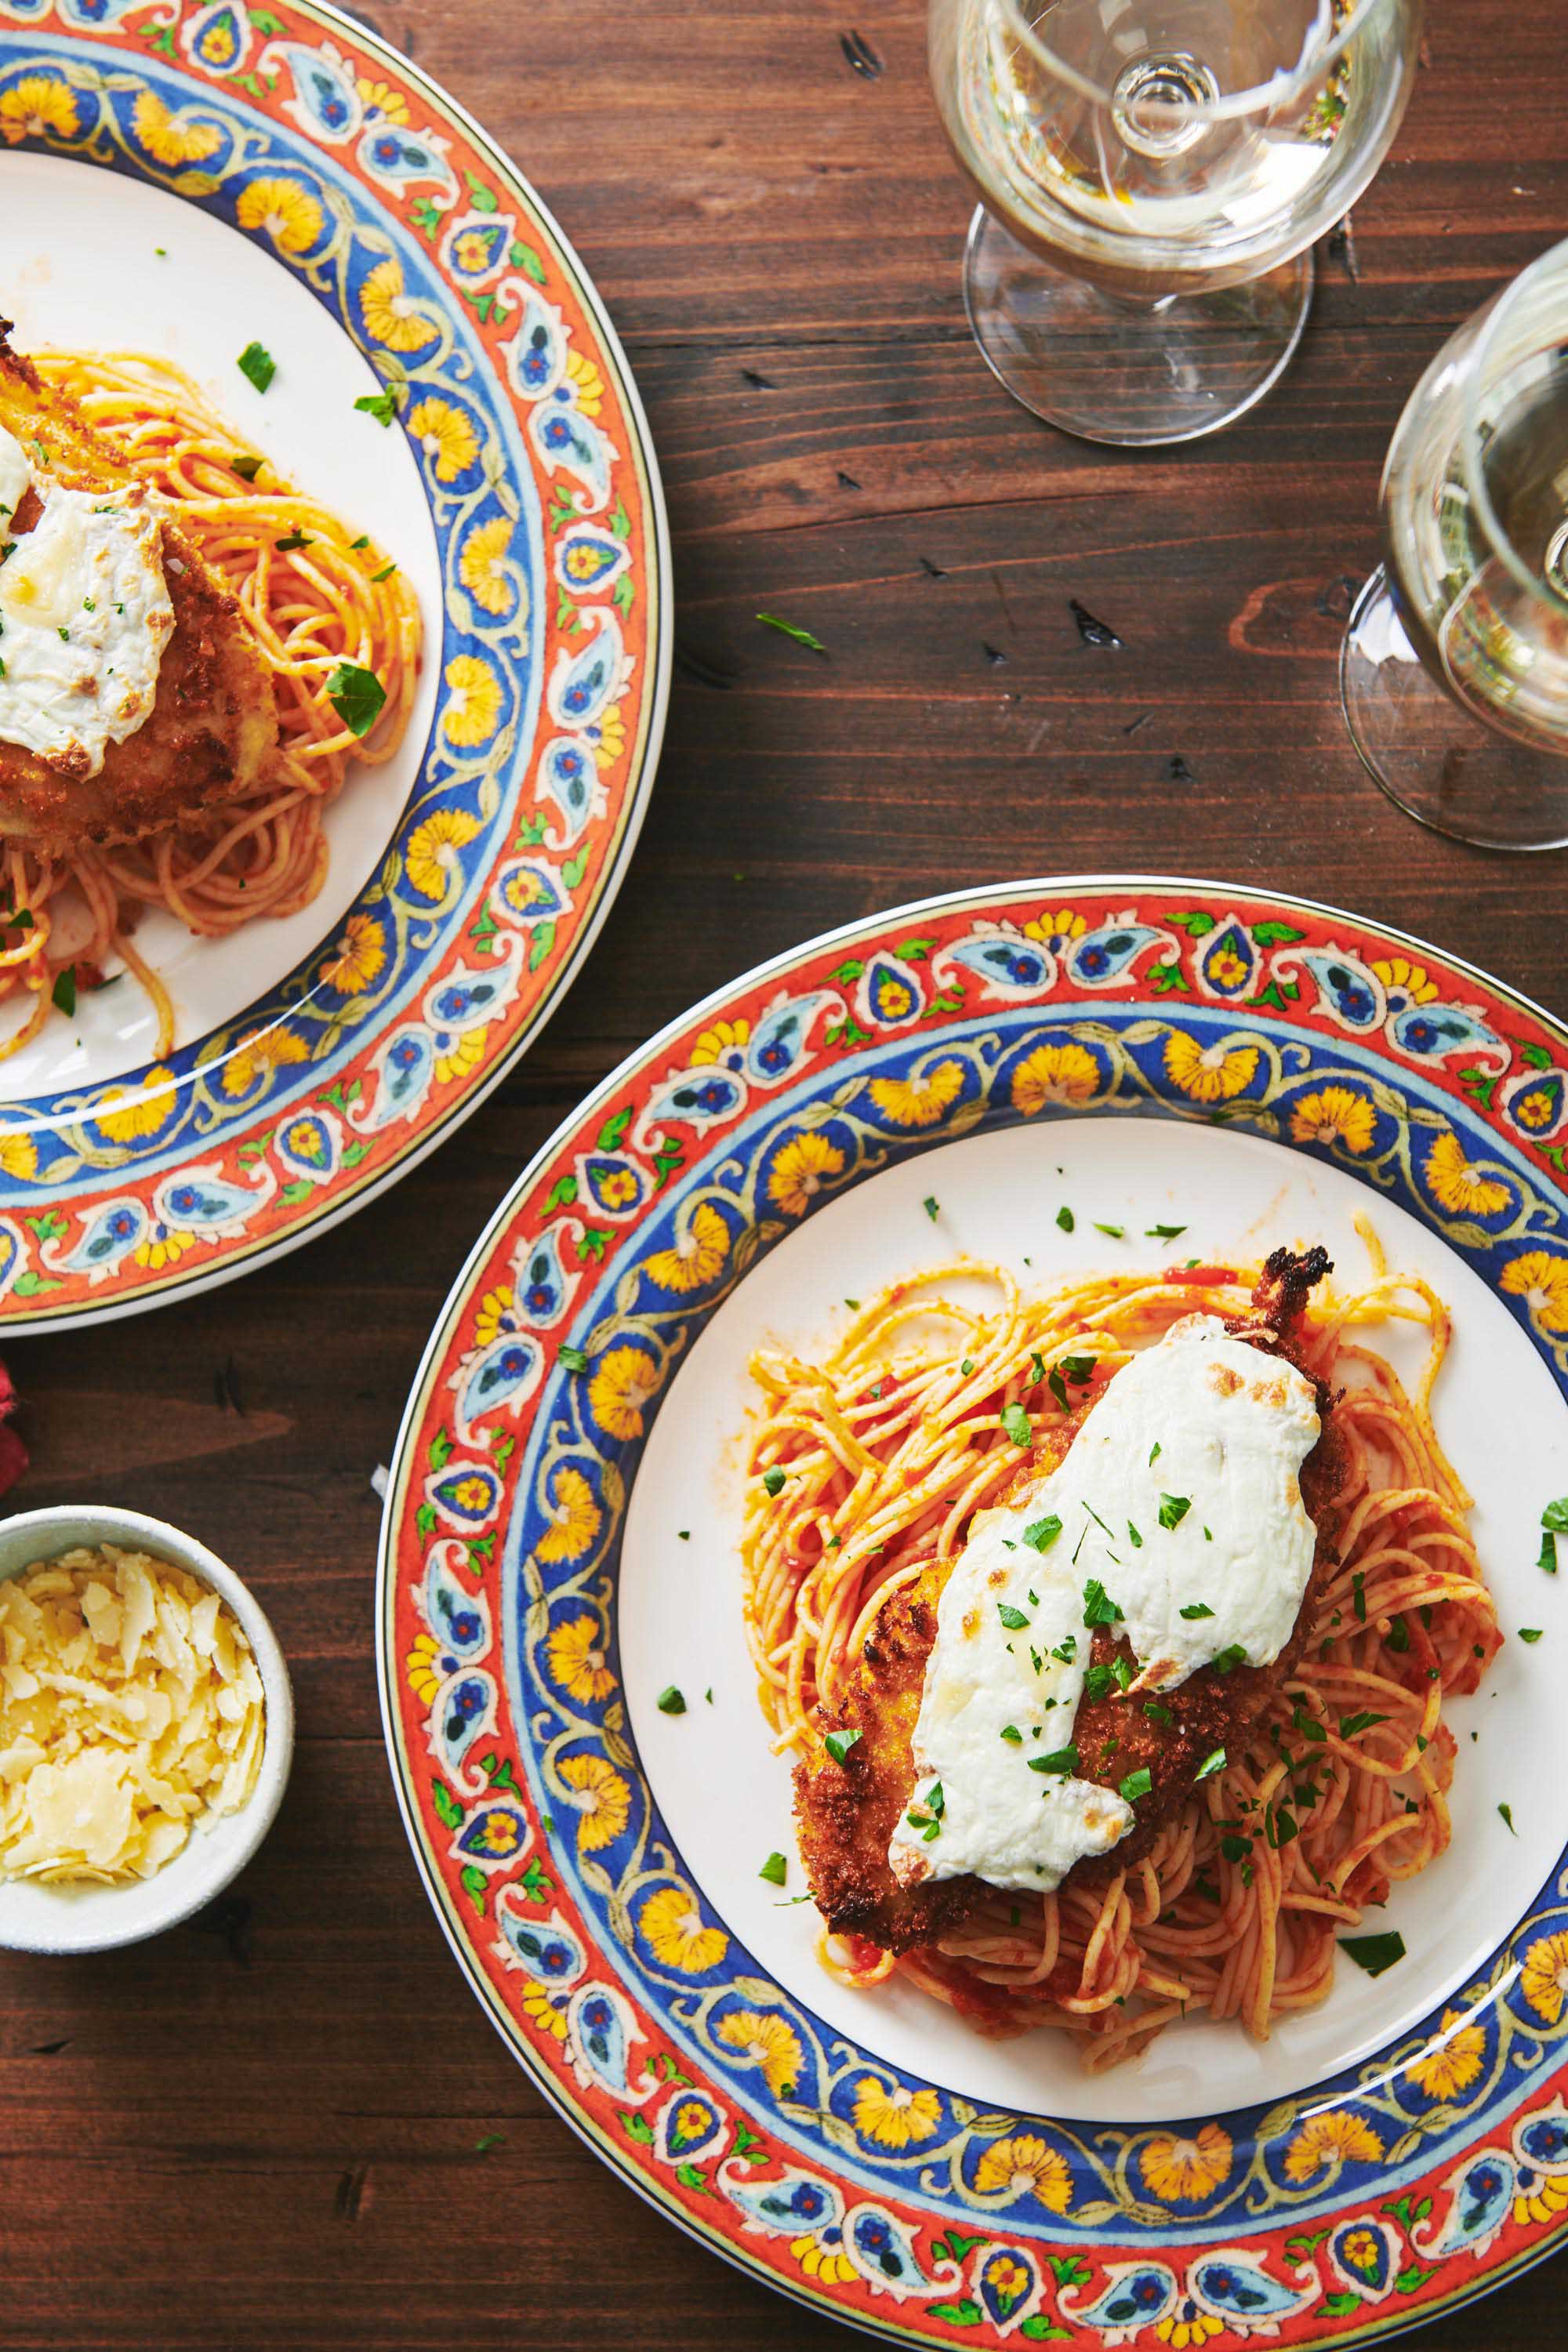 Two colorful plates of Chicken Parmigiana on wood table.